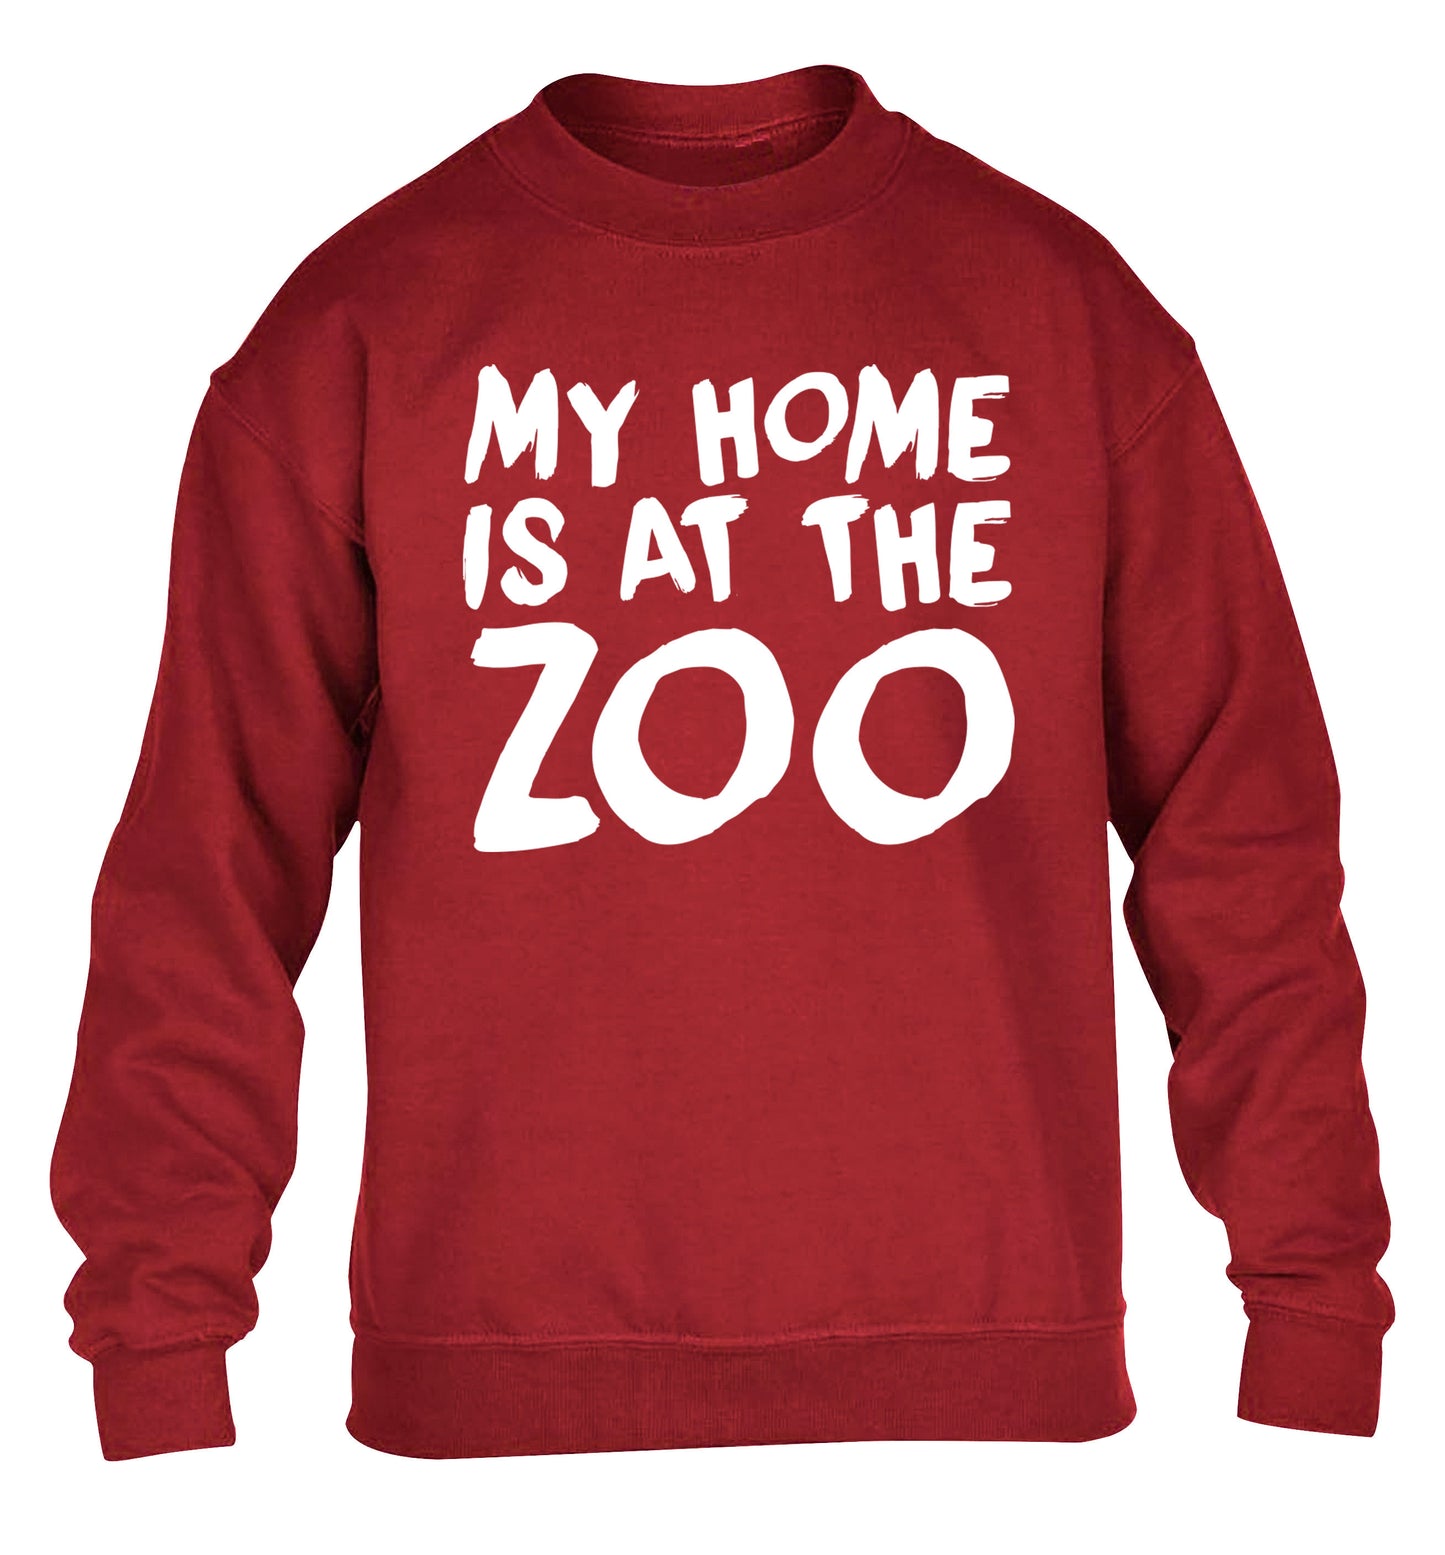 My home is at the zoo children's grey sweater 12-14 Years